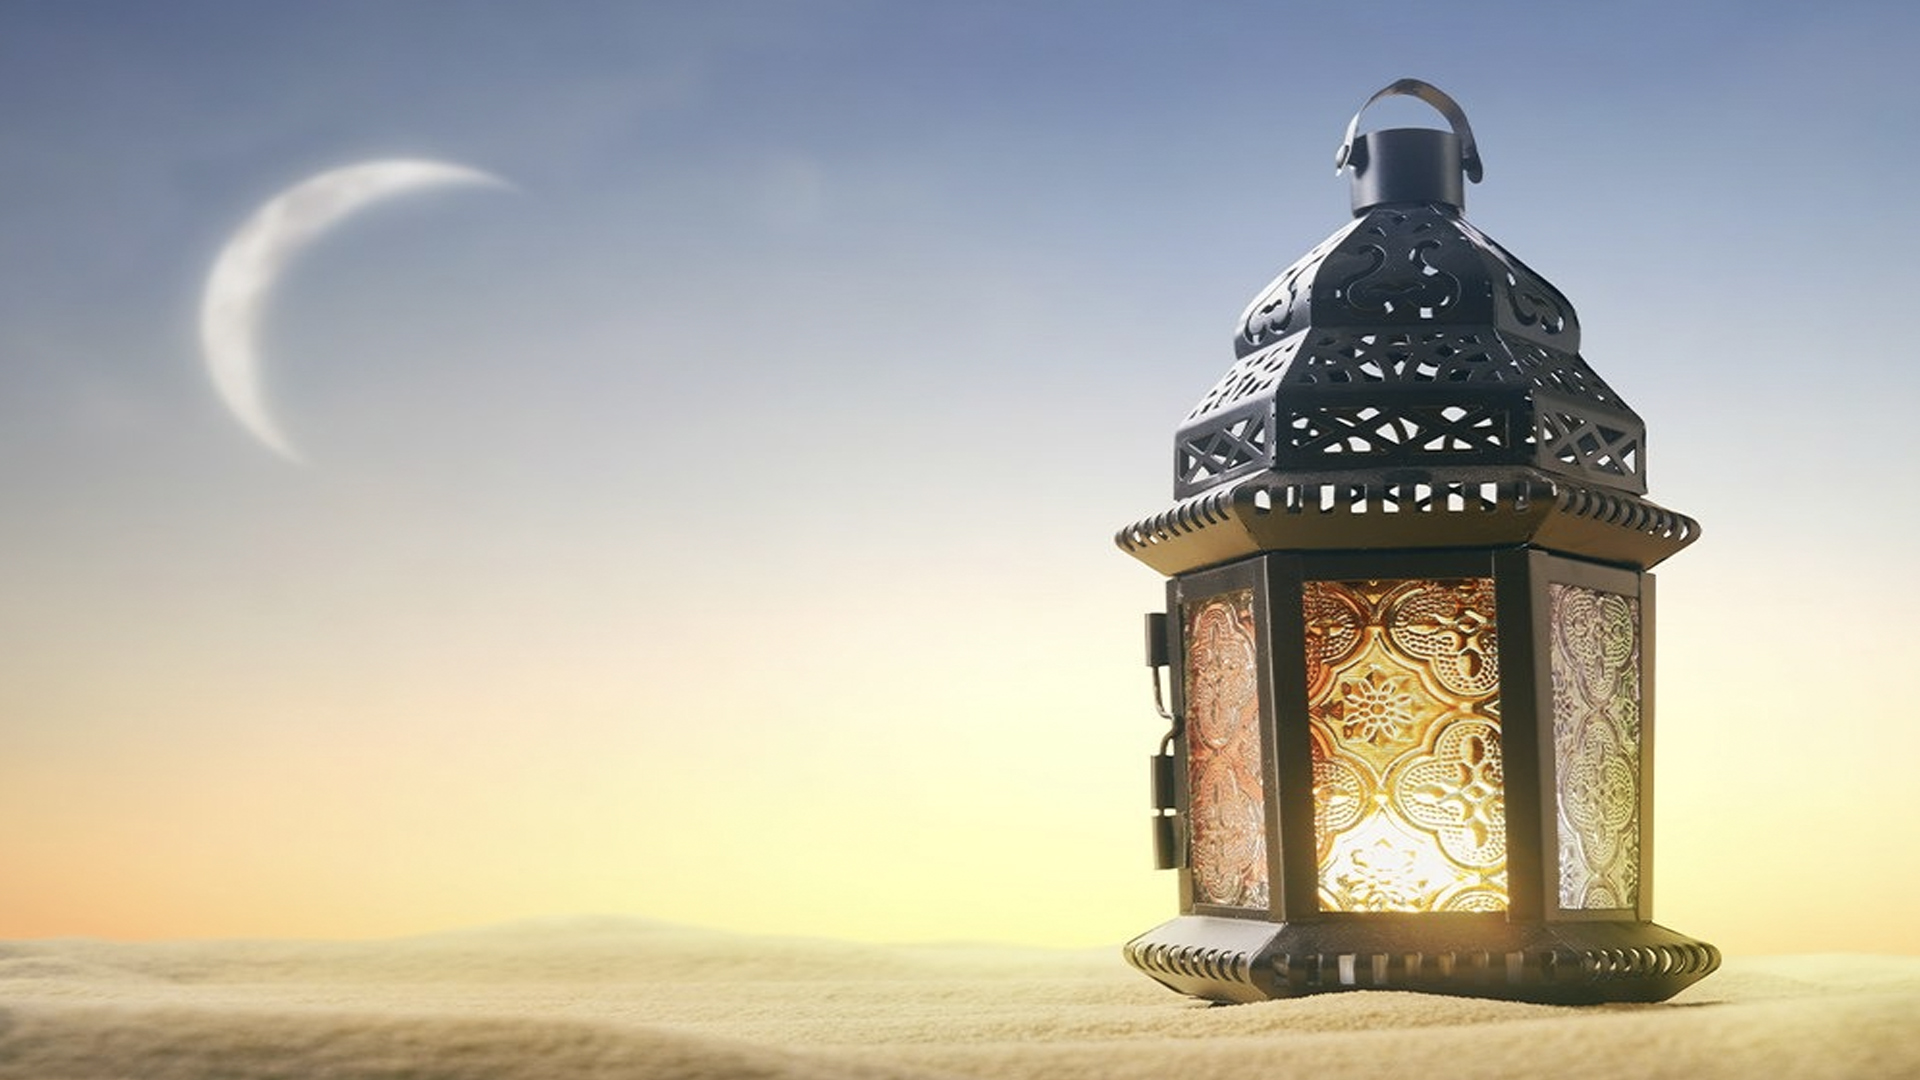 Monday first day of Ramadan in UAE